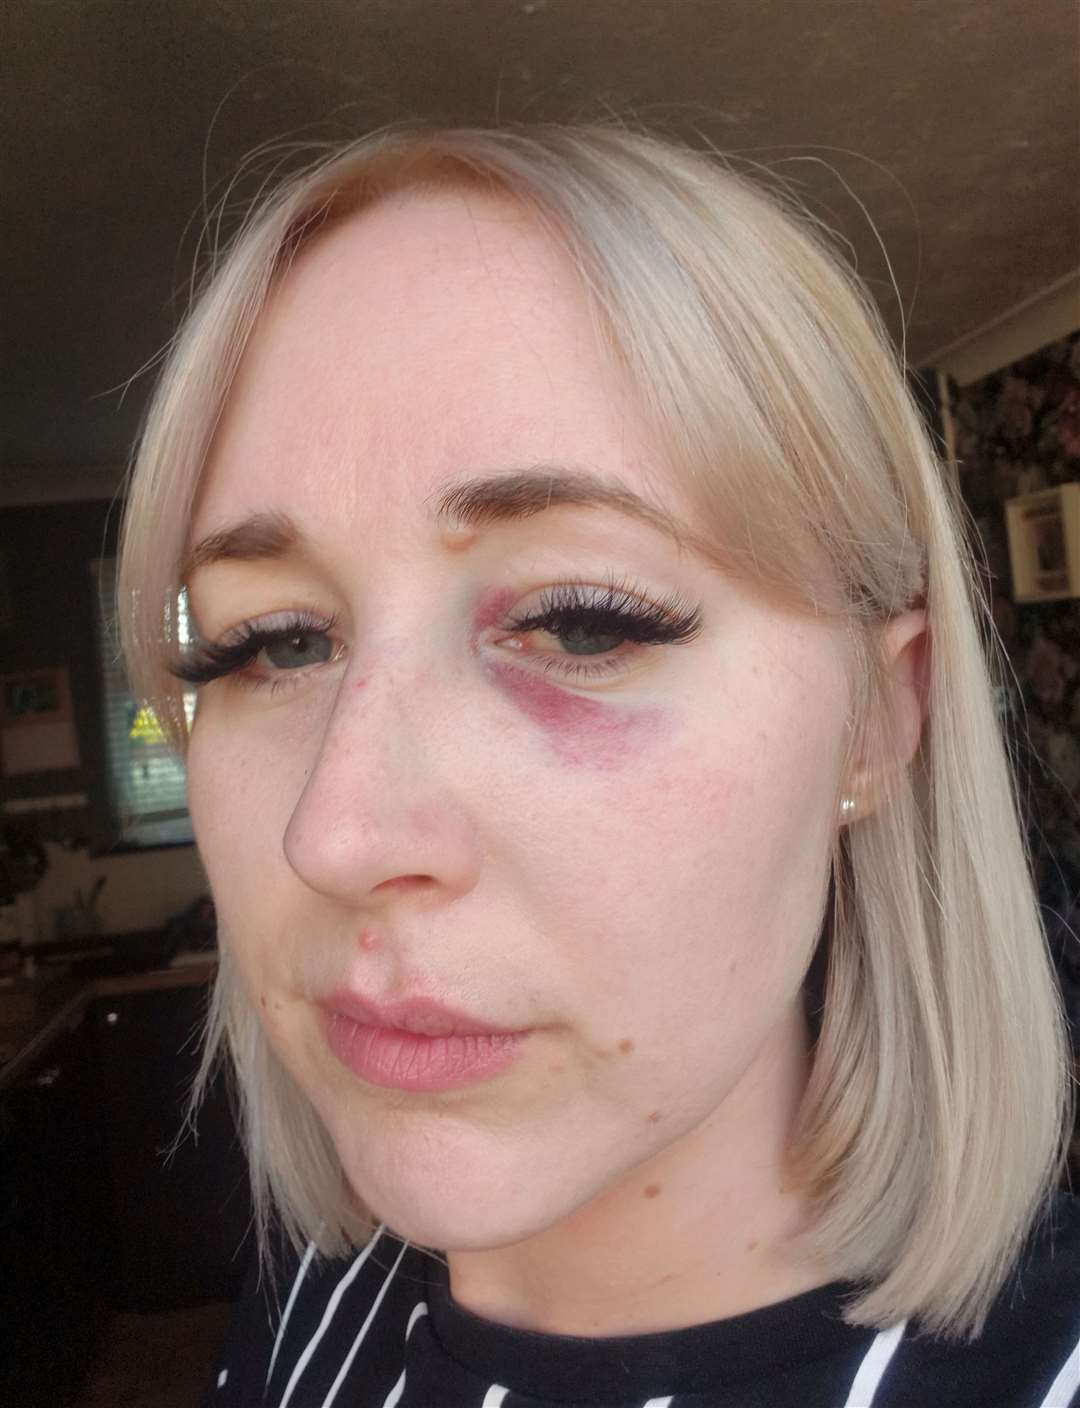 Megan Davis after being hit in the eye by a cricket ball on May 19 Submitted pictures